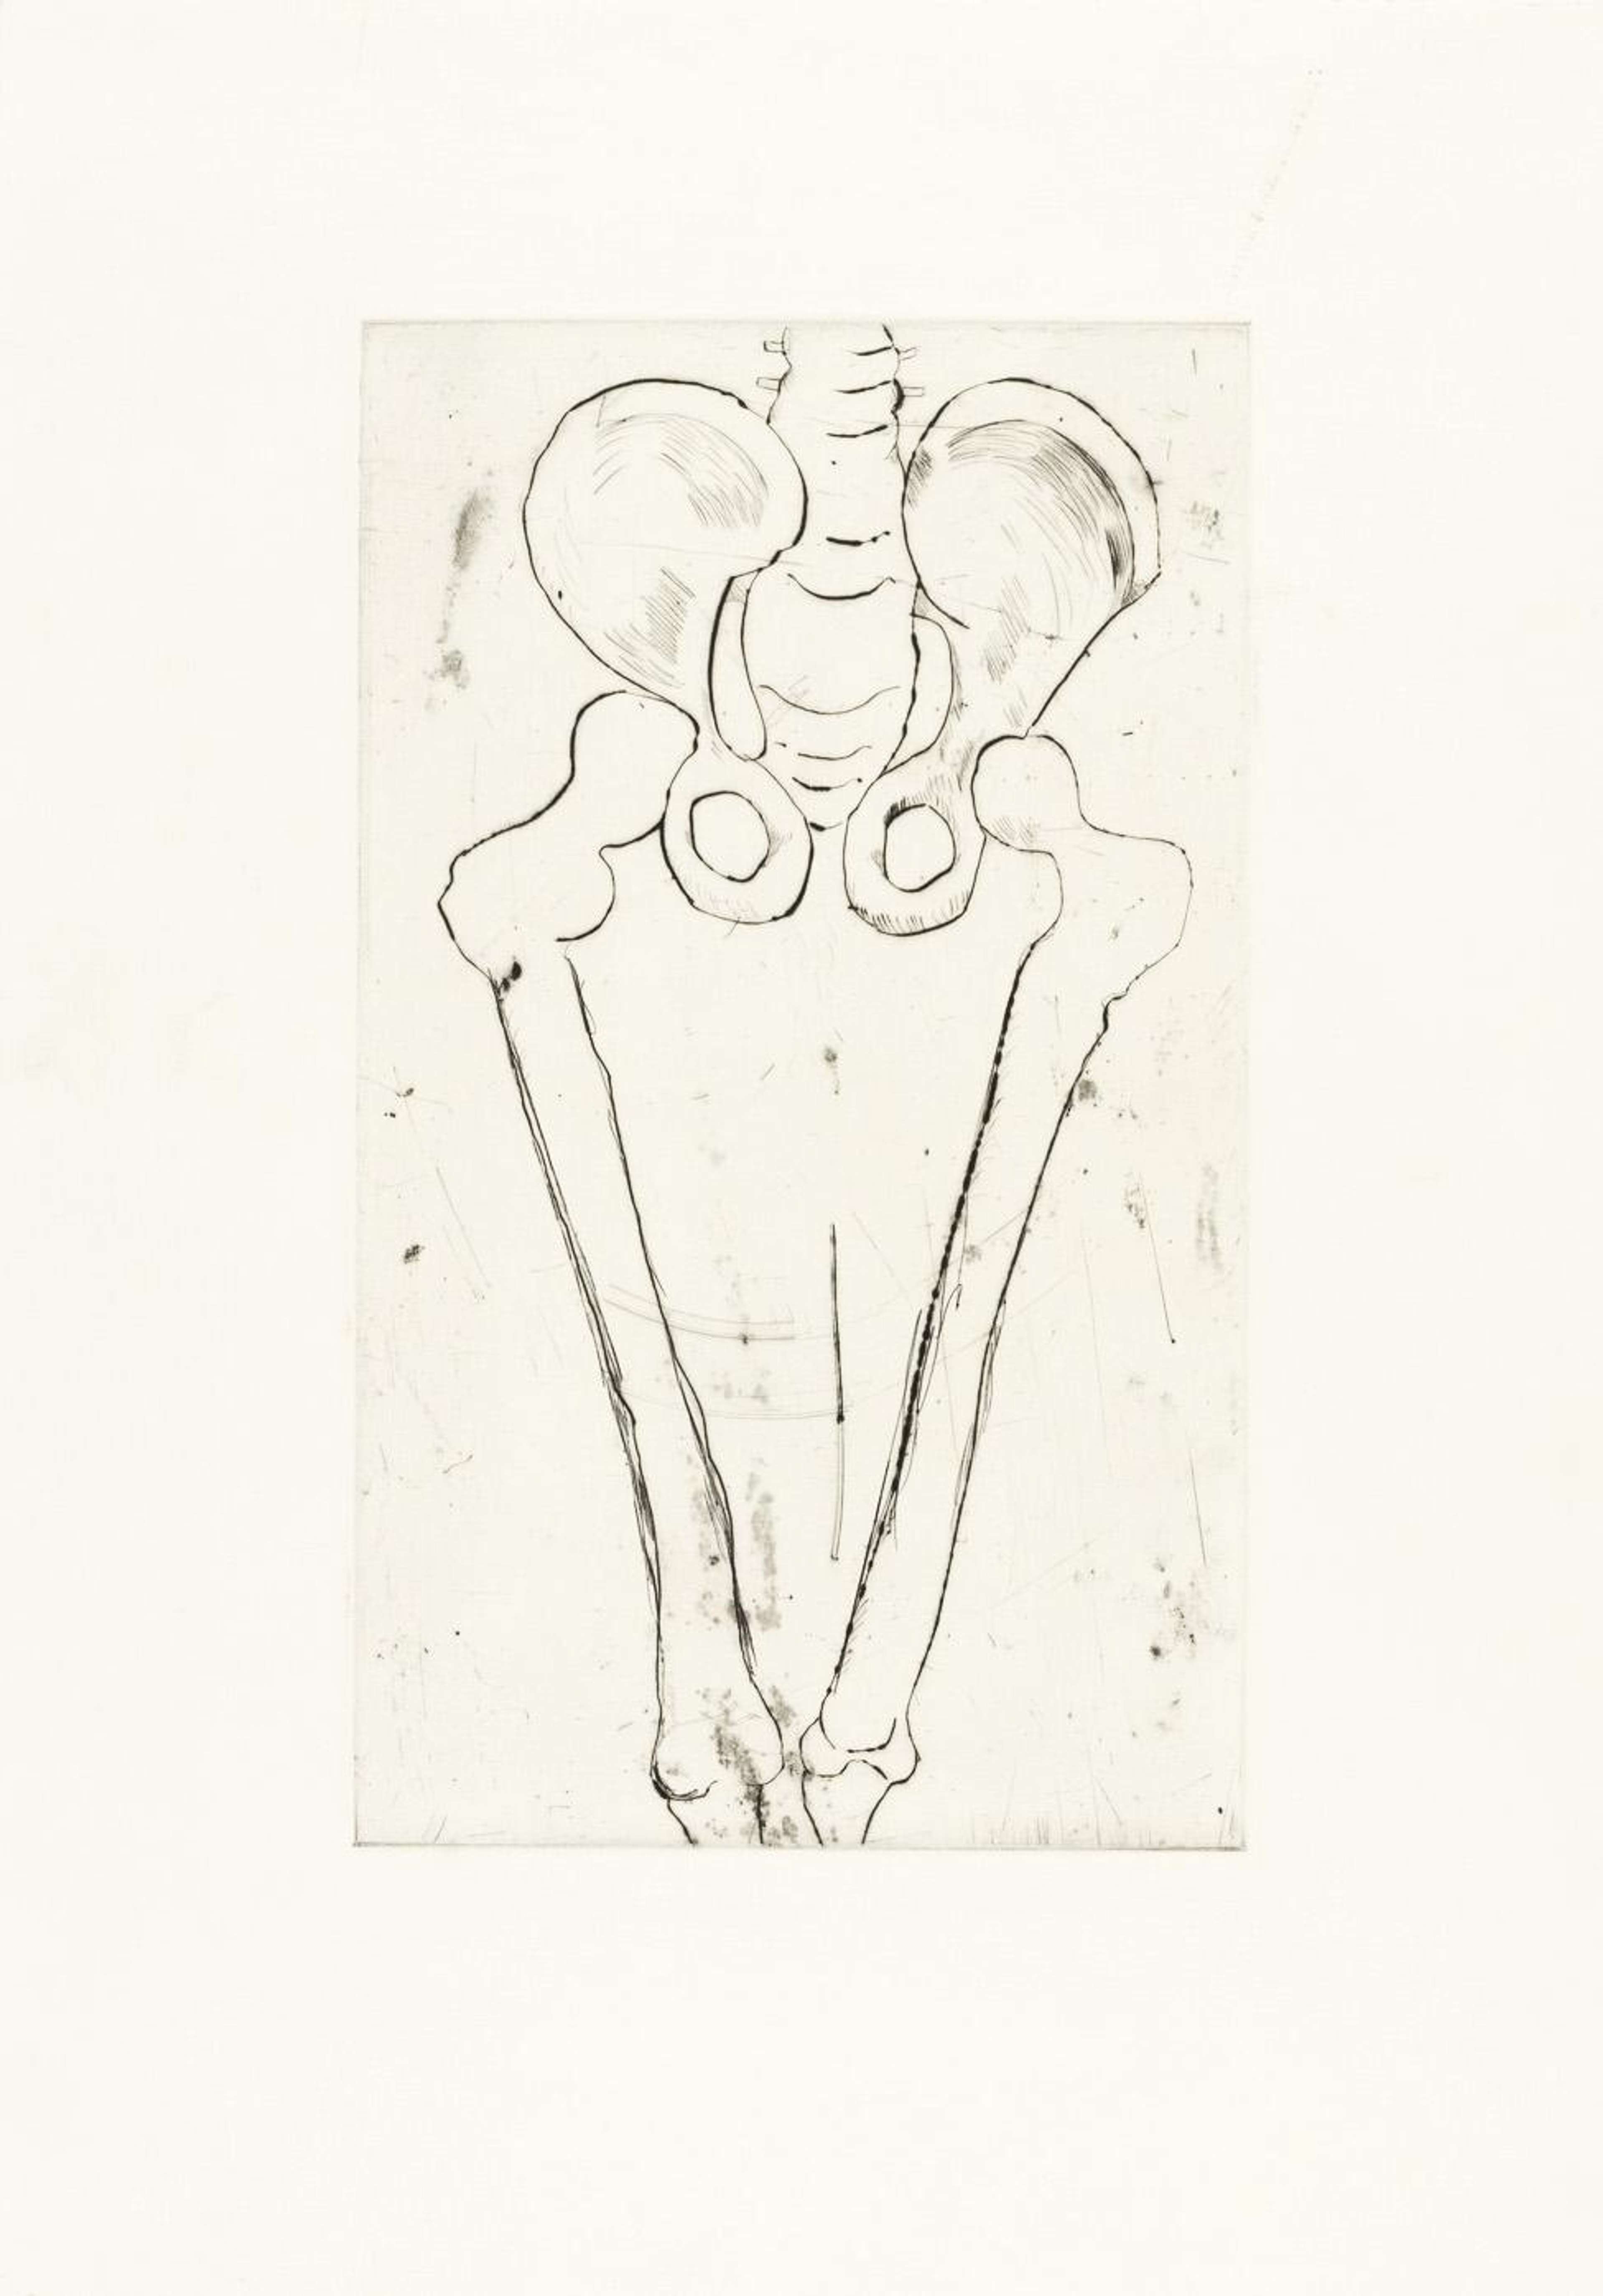 This print by Bourgeois shows a drawing of a human femur, done in fine black lines against a white background.